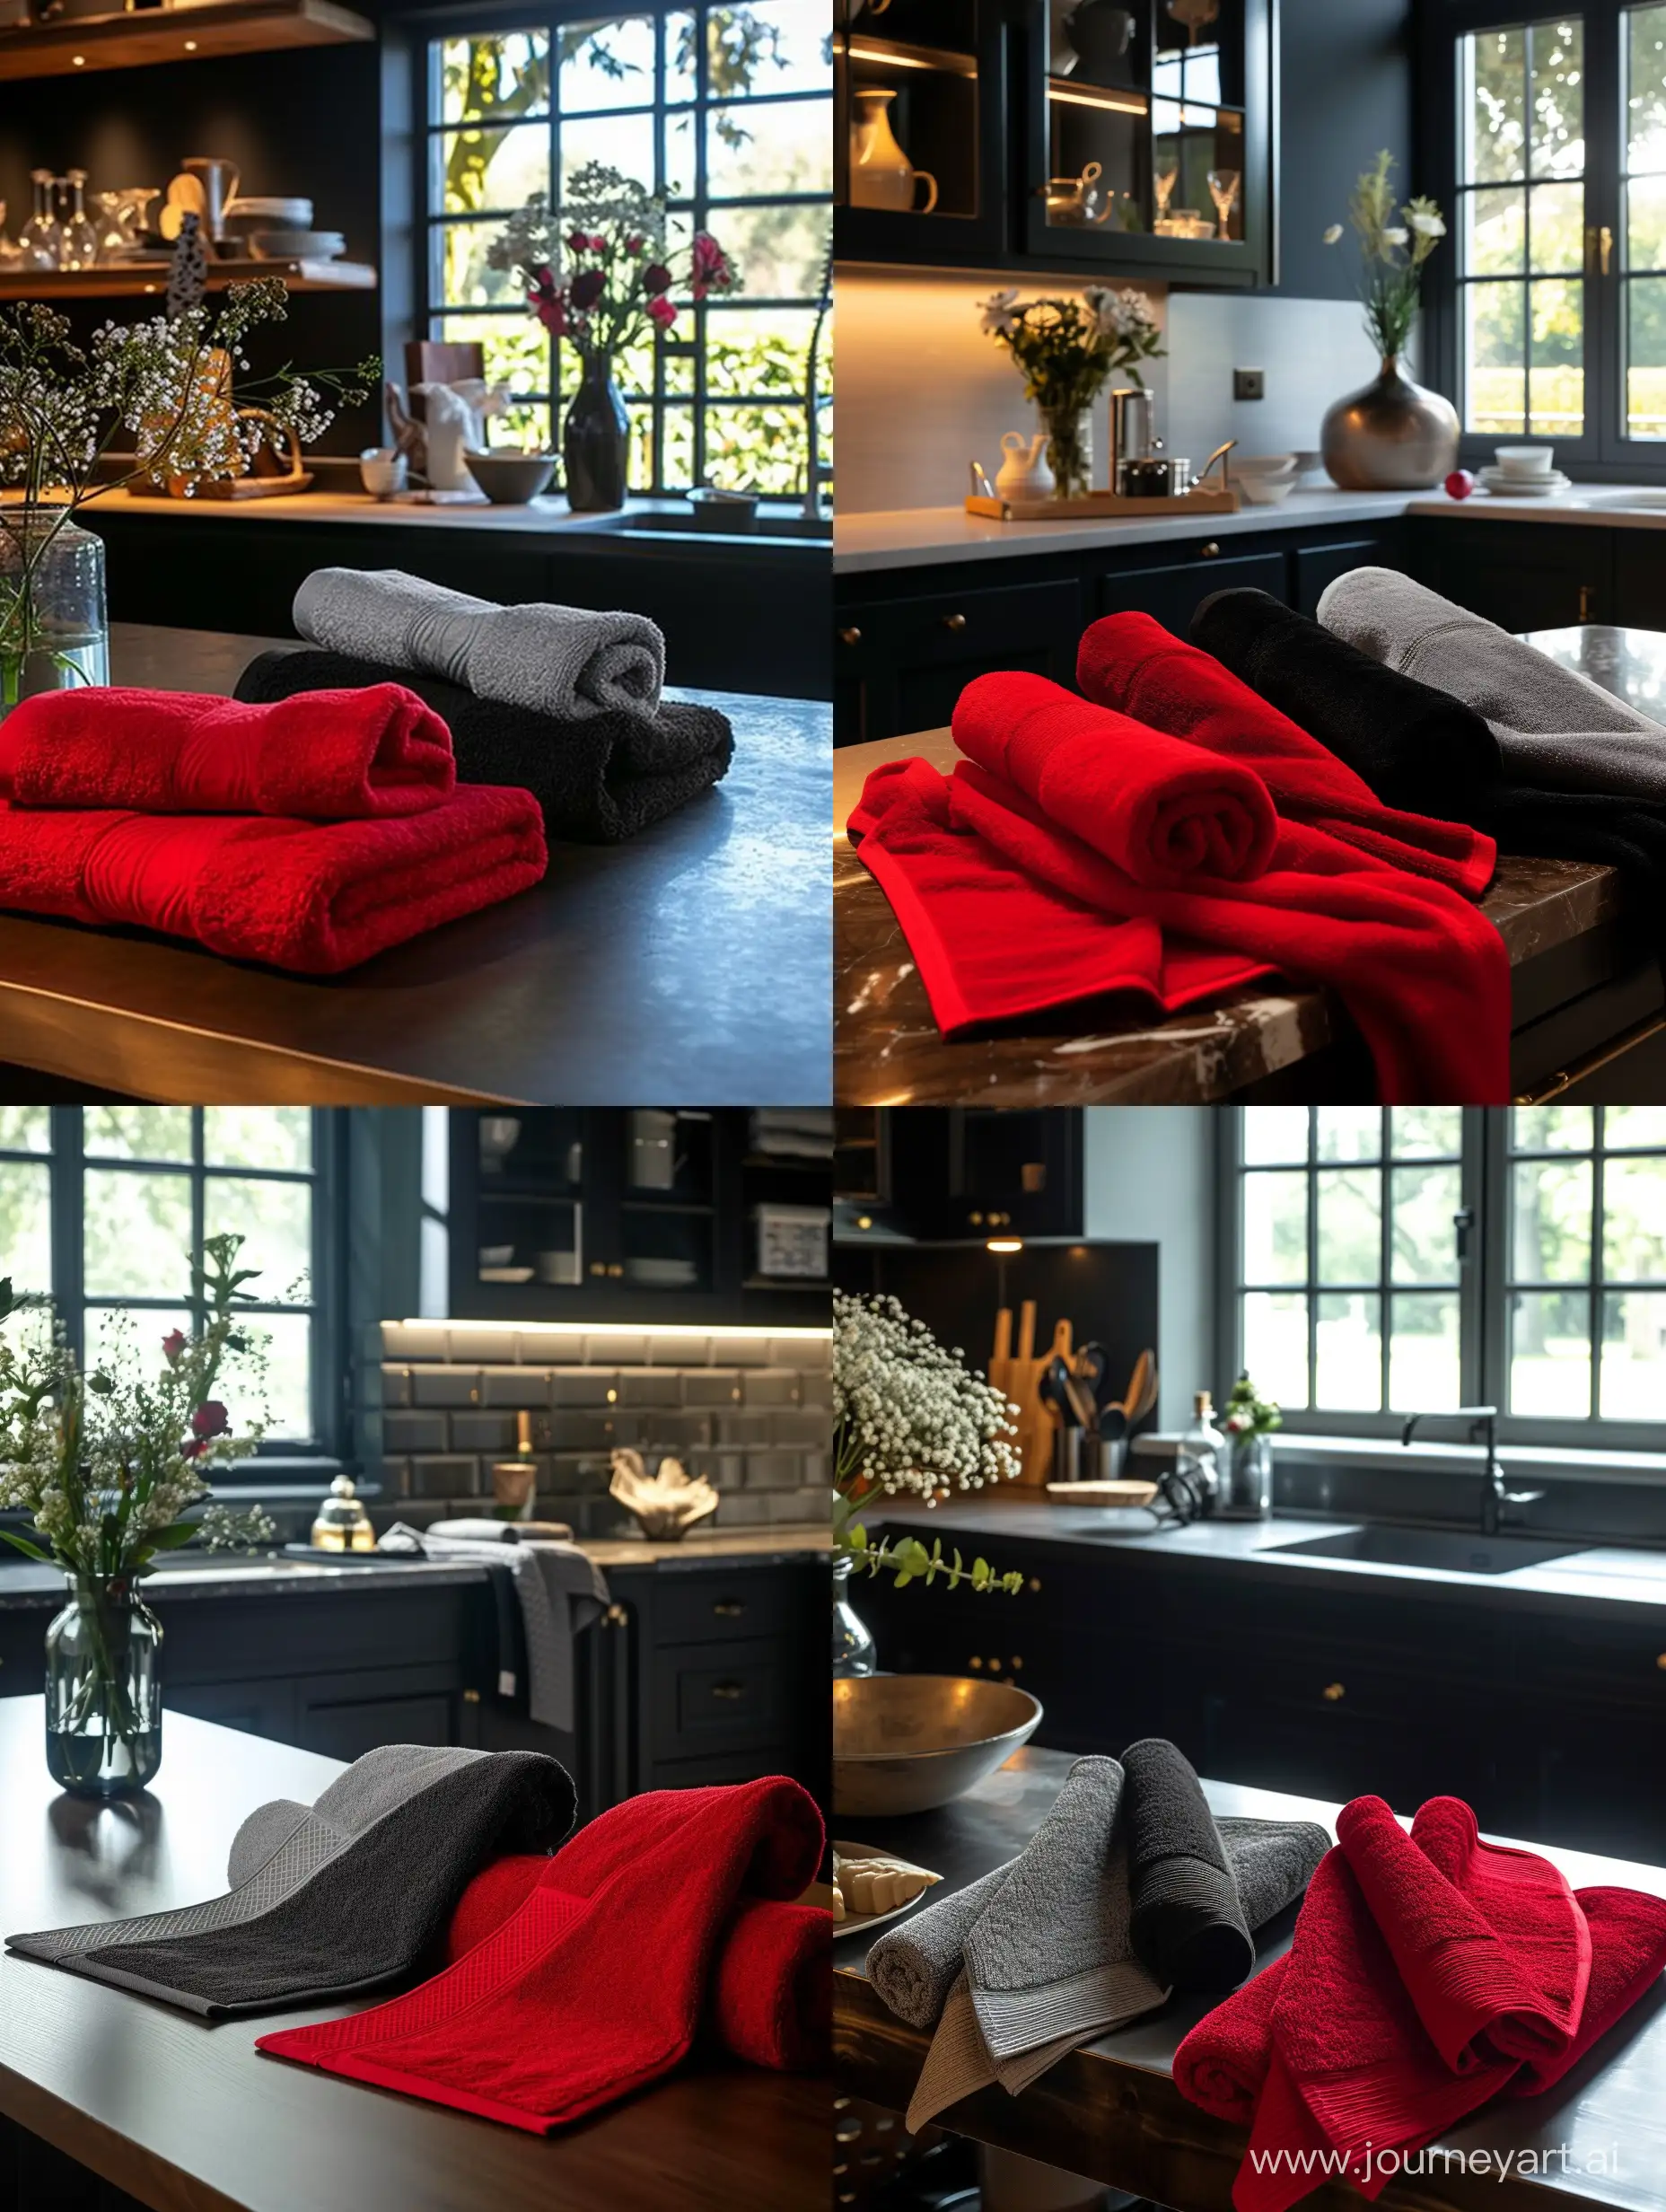 Stylish-Dark-Kitchen-Table-Setting-with-Colorful-Towels-and-Flowers